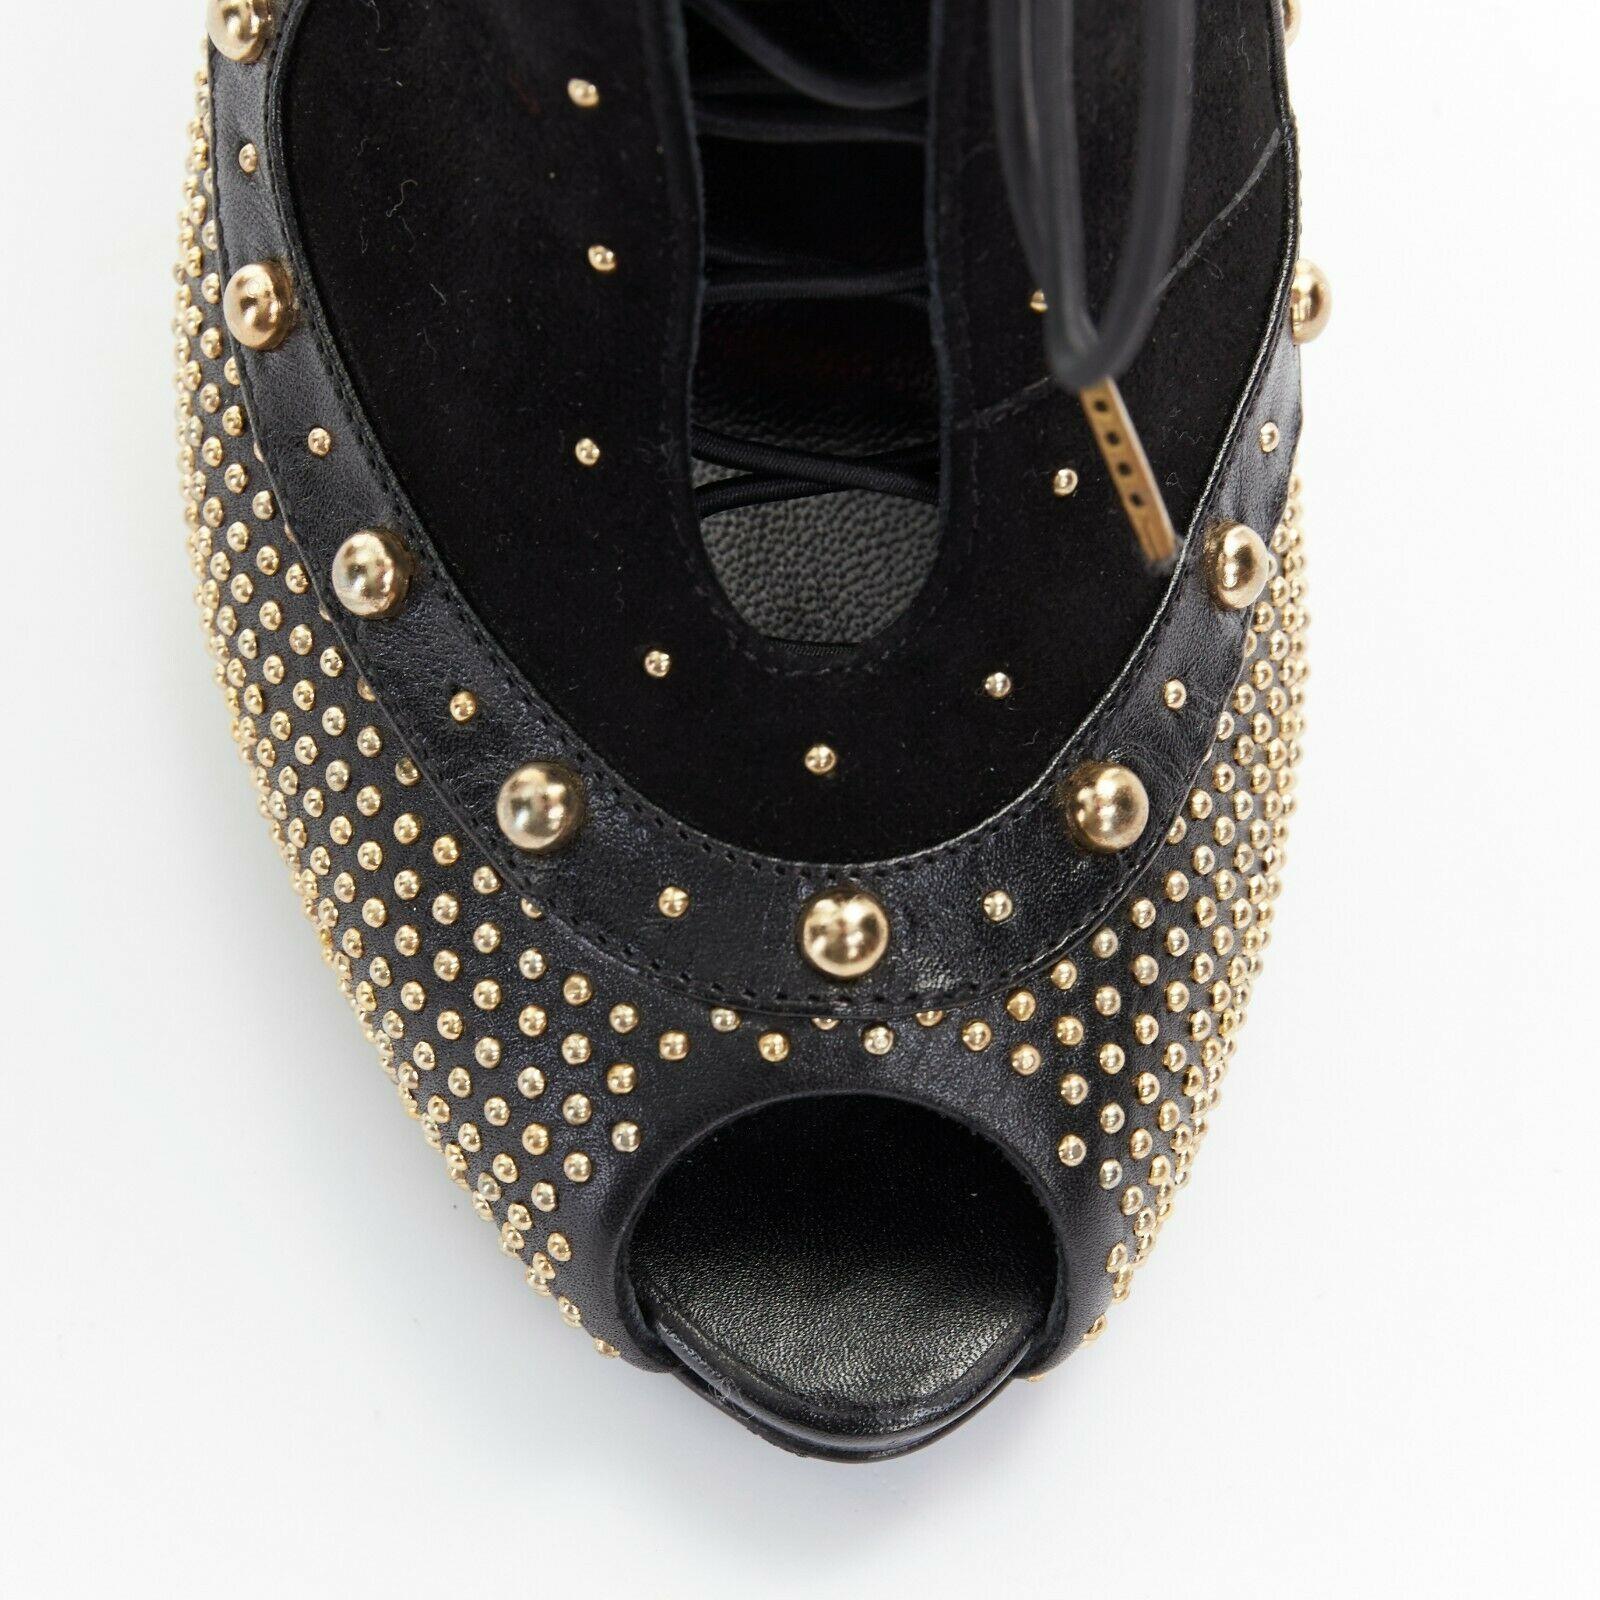 new ALEXANDER MCQUEEN black suede gold stud peep toe lace up ankle bootie EU37 1